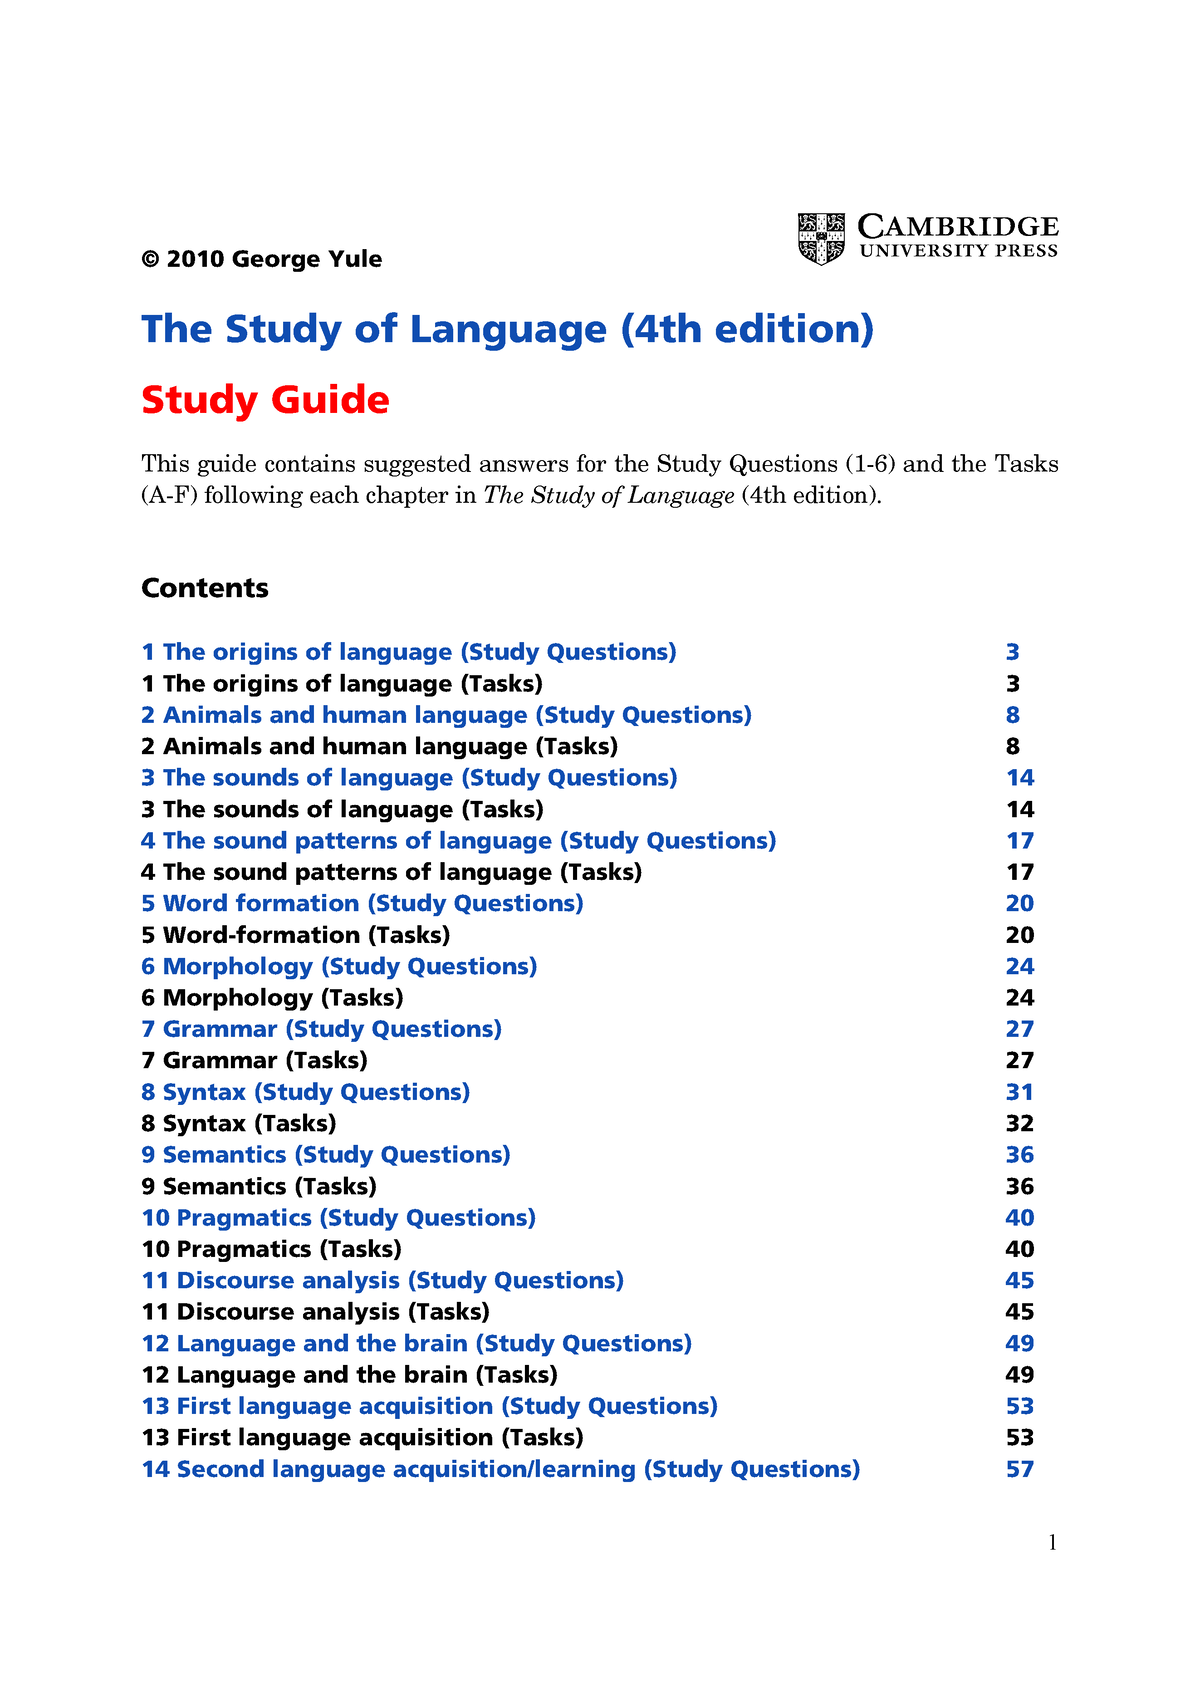 research study about language